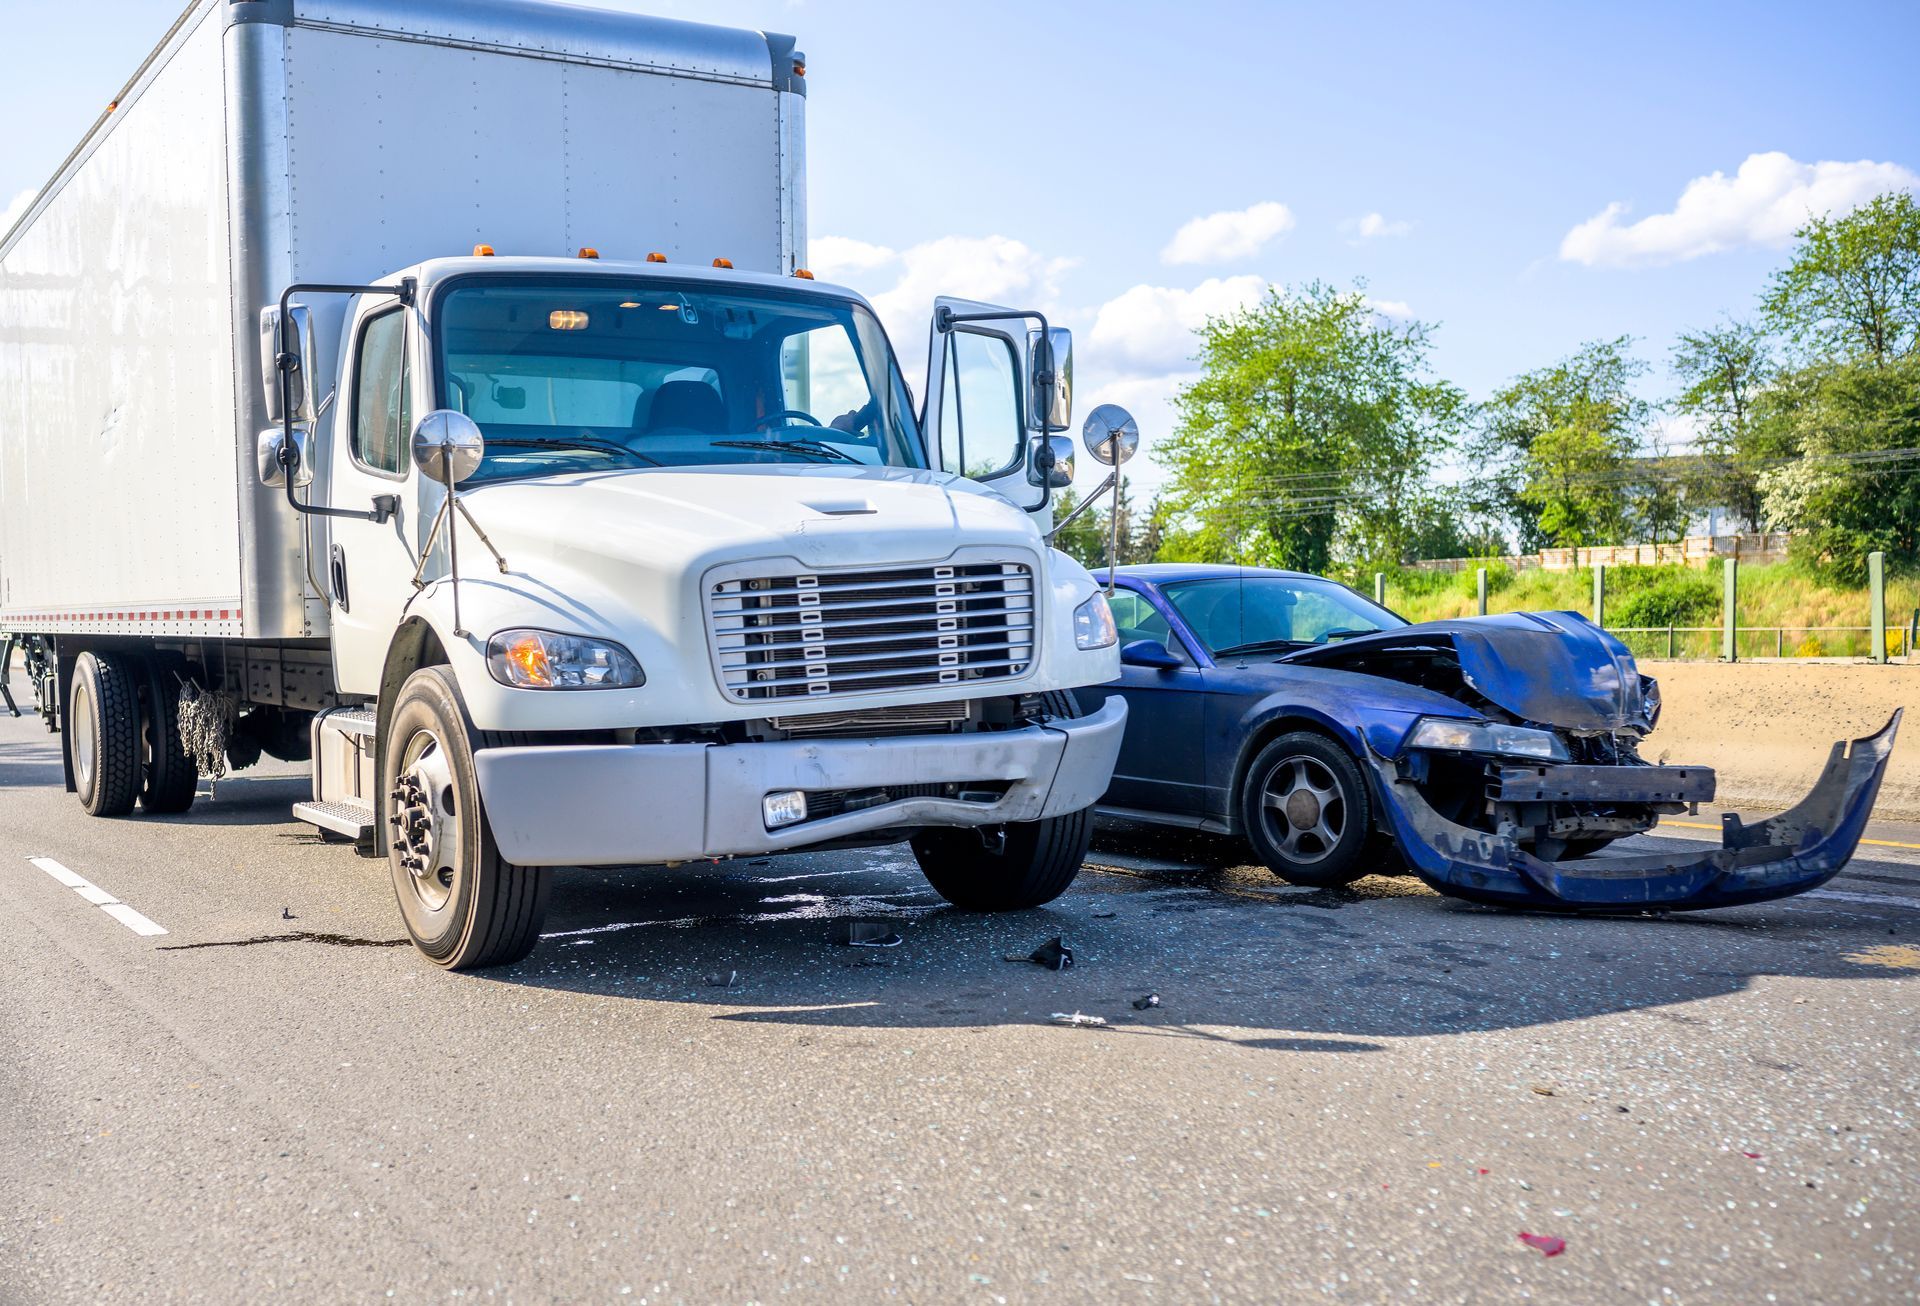 Truck and car collision